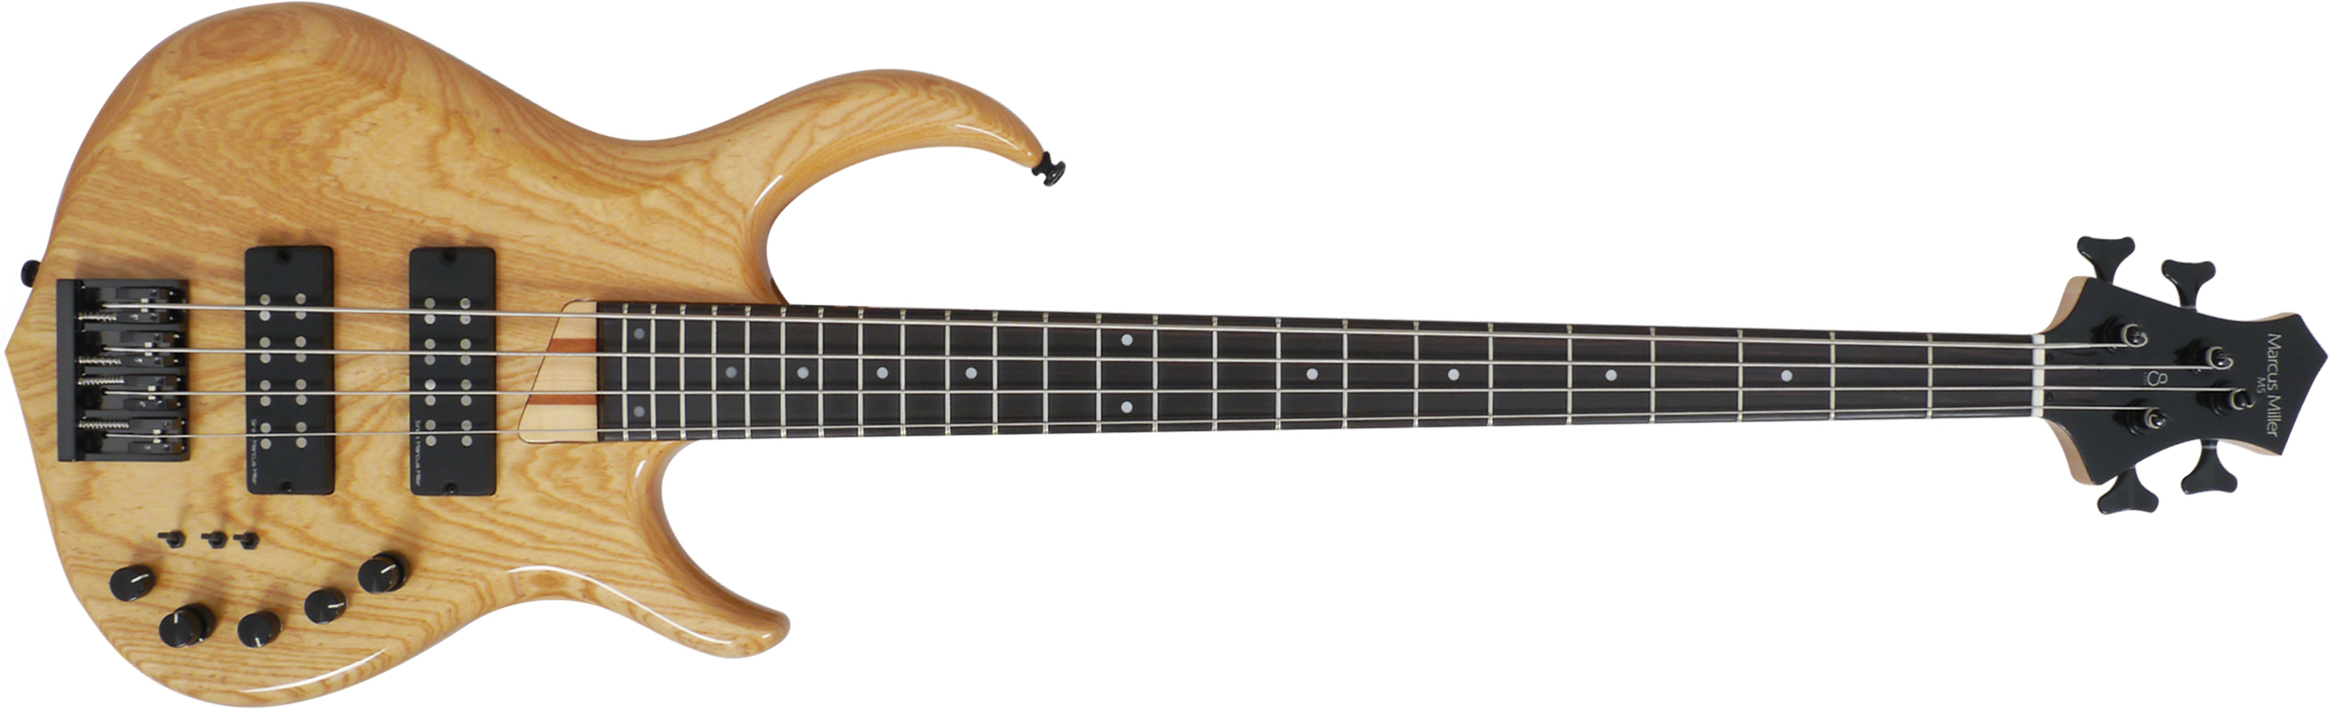 Marcus Miller M5 Swamp Ash 4st Active Eb - Natural - Solidbody E-bass - Main picture